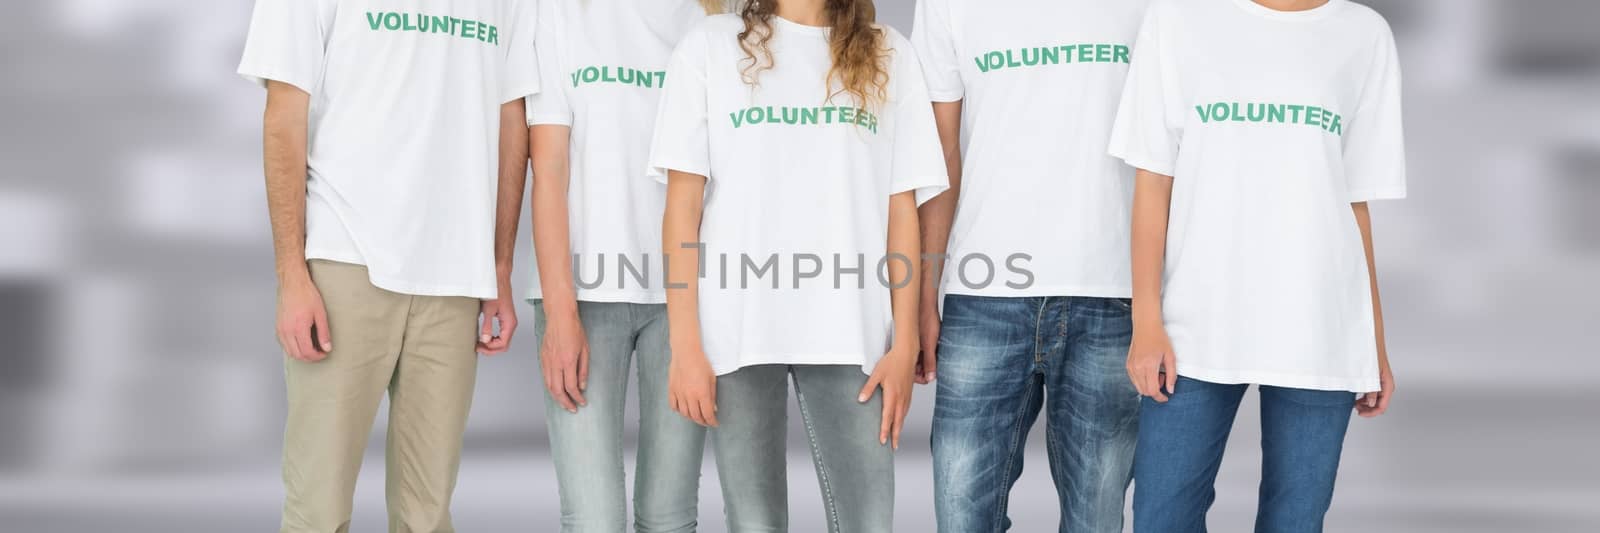 Group of Volunteer People standing together with blurred background by Wavebreakmedia